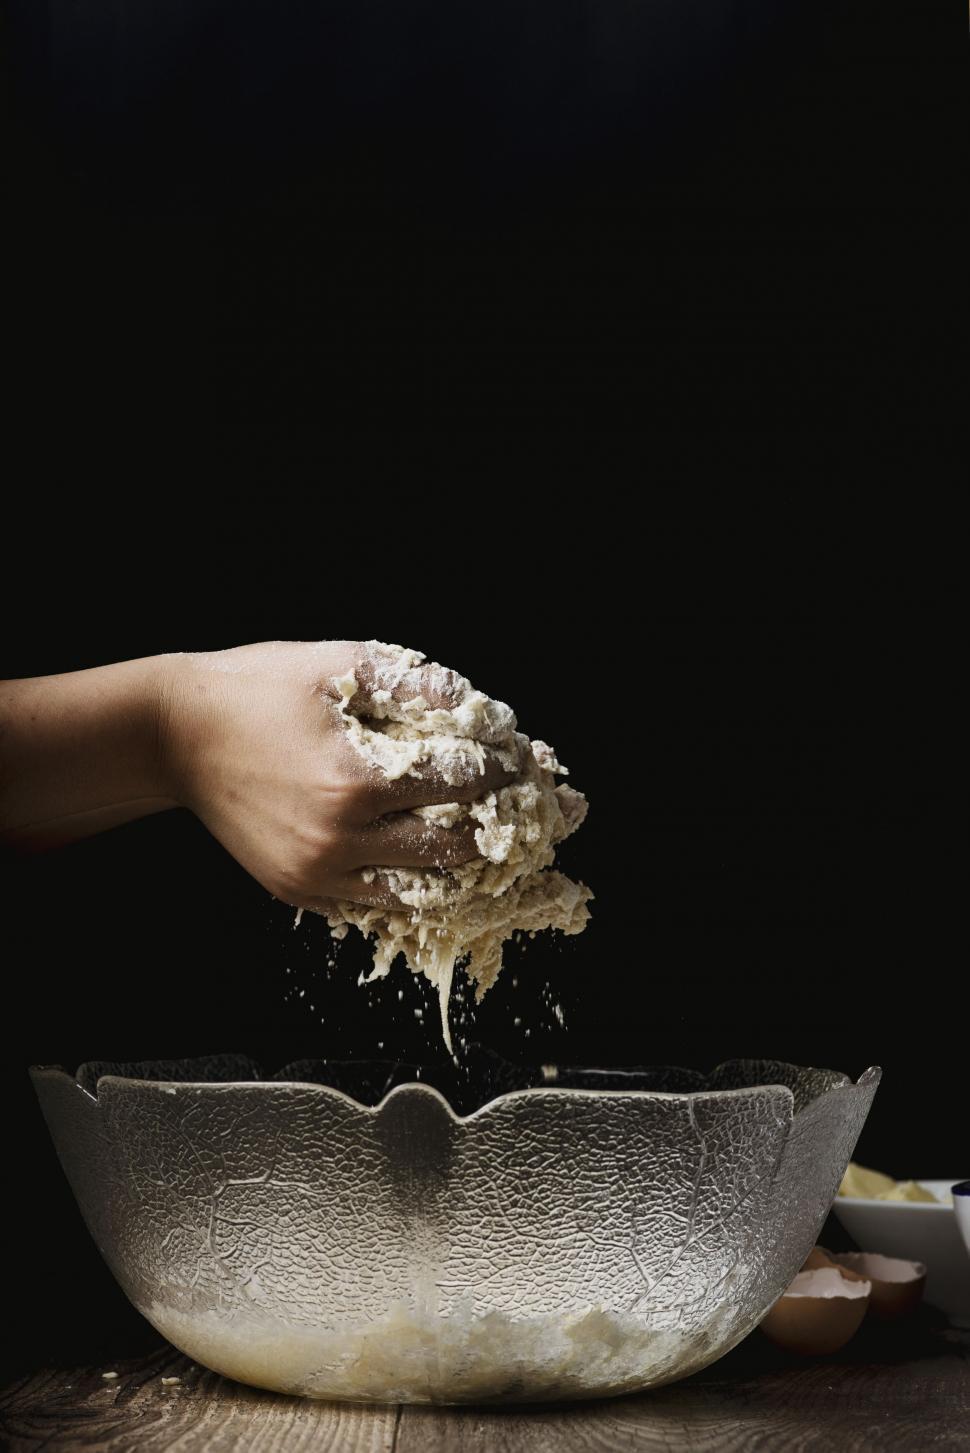 Free Image of Person Sprinkling Flour Into a Bowl 